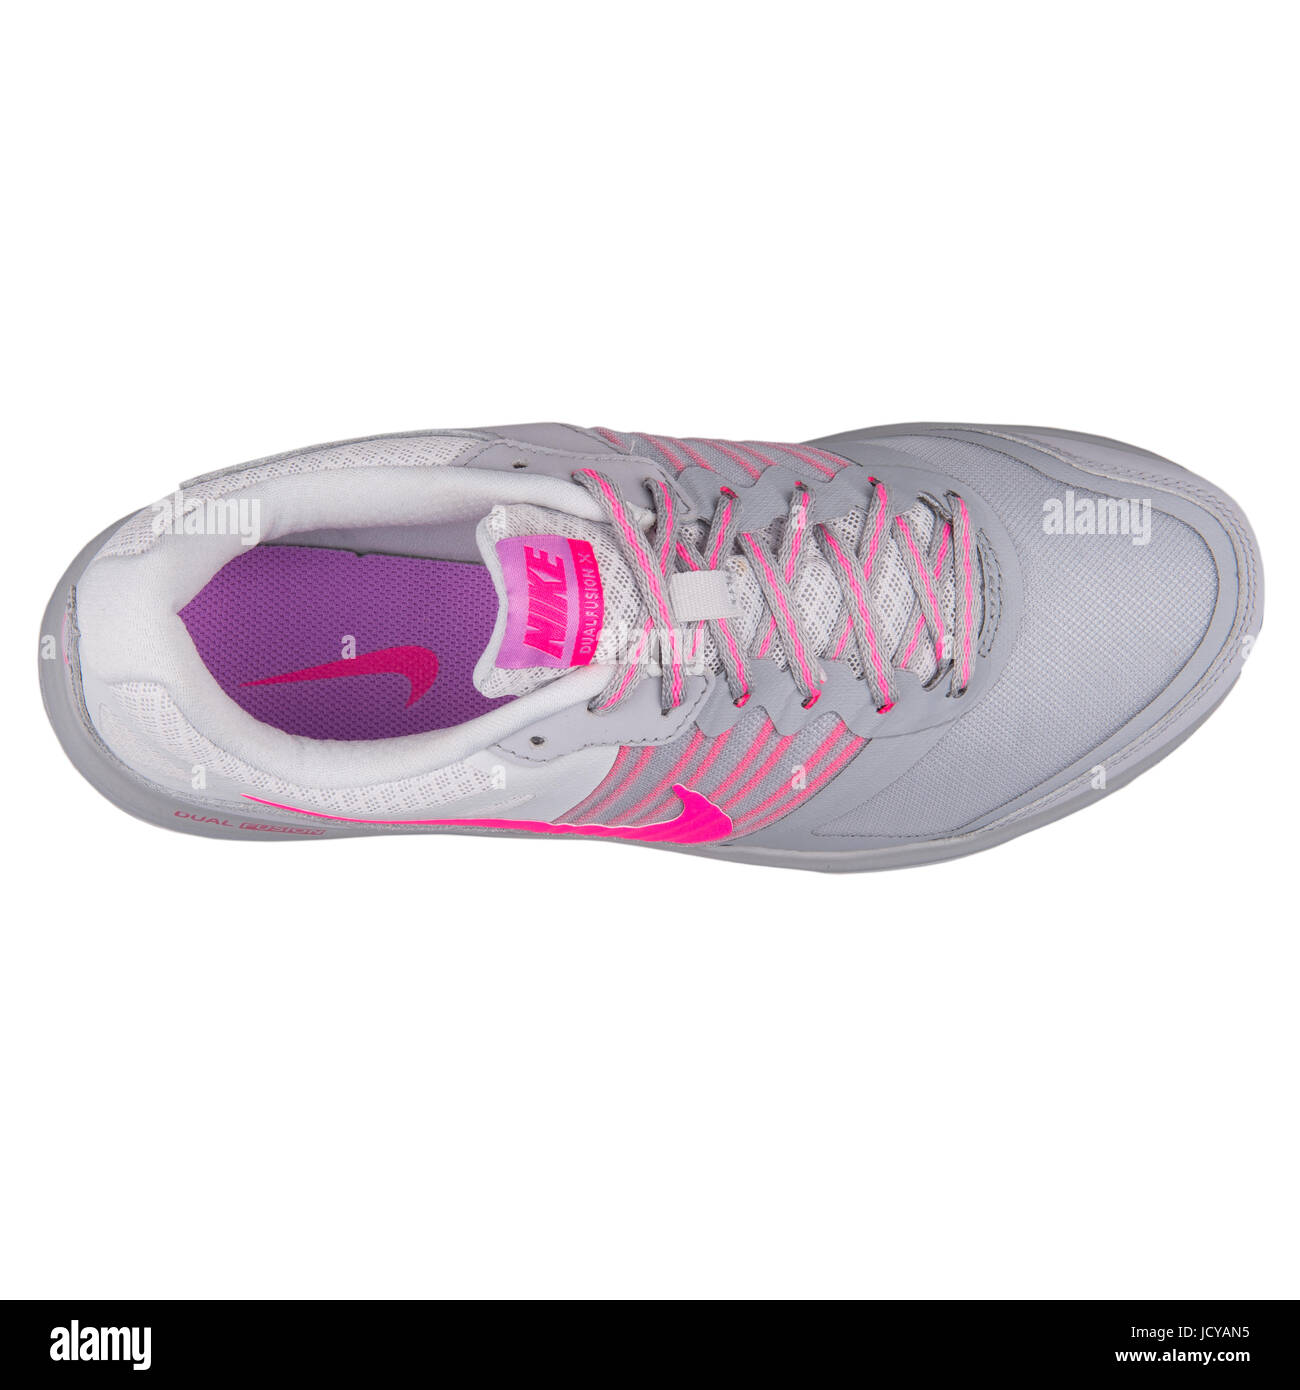 Nike WMNS Dual Fusion X Wolf Grey and Pink Women's Running Shoes -  709501-006 Stock Photo - Alamy